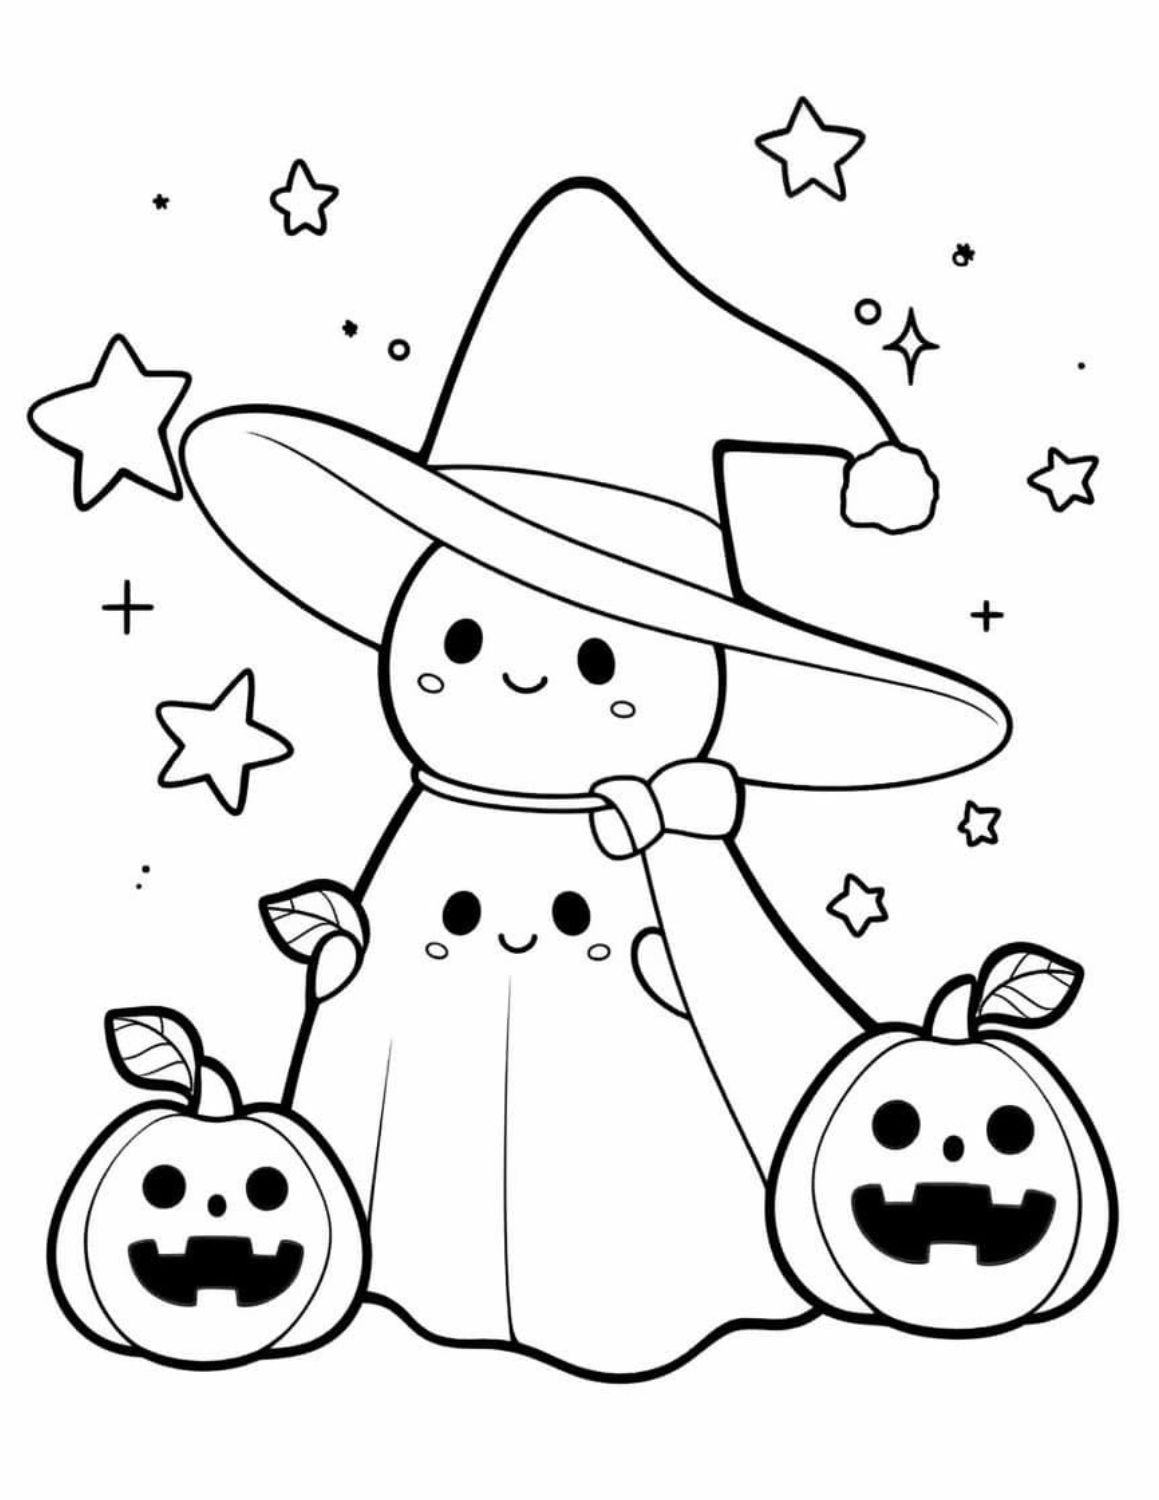 HalloWeen Pumpkin Coloring Book : Great Coloring Pages for Boys and Girls